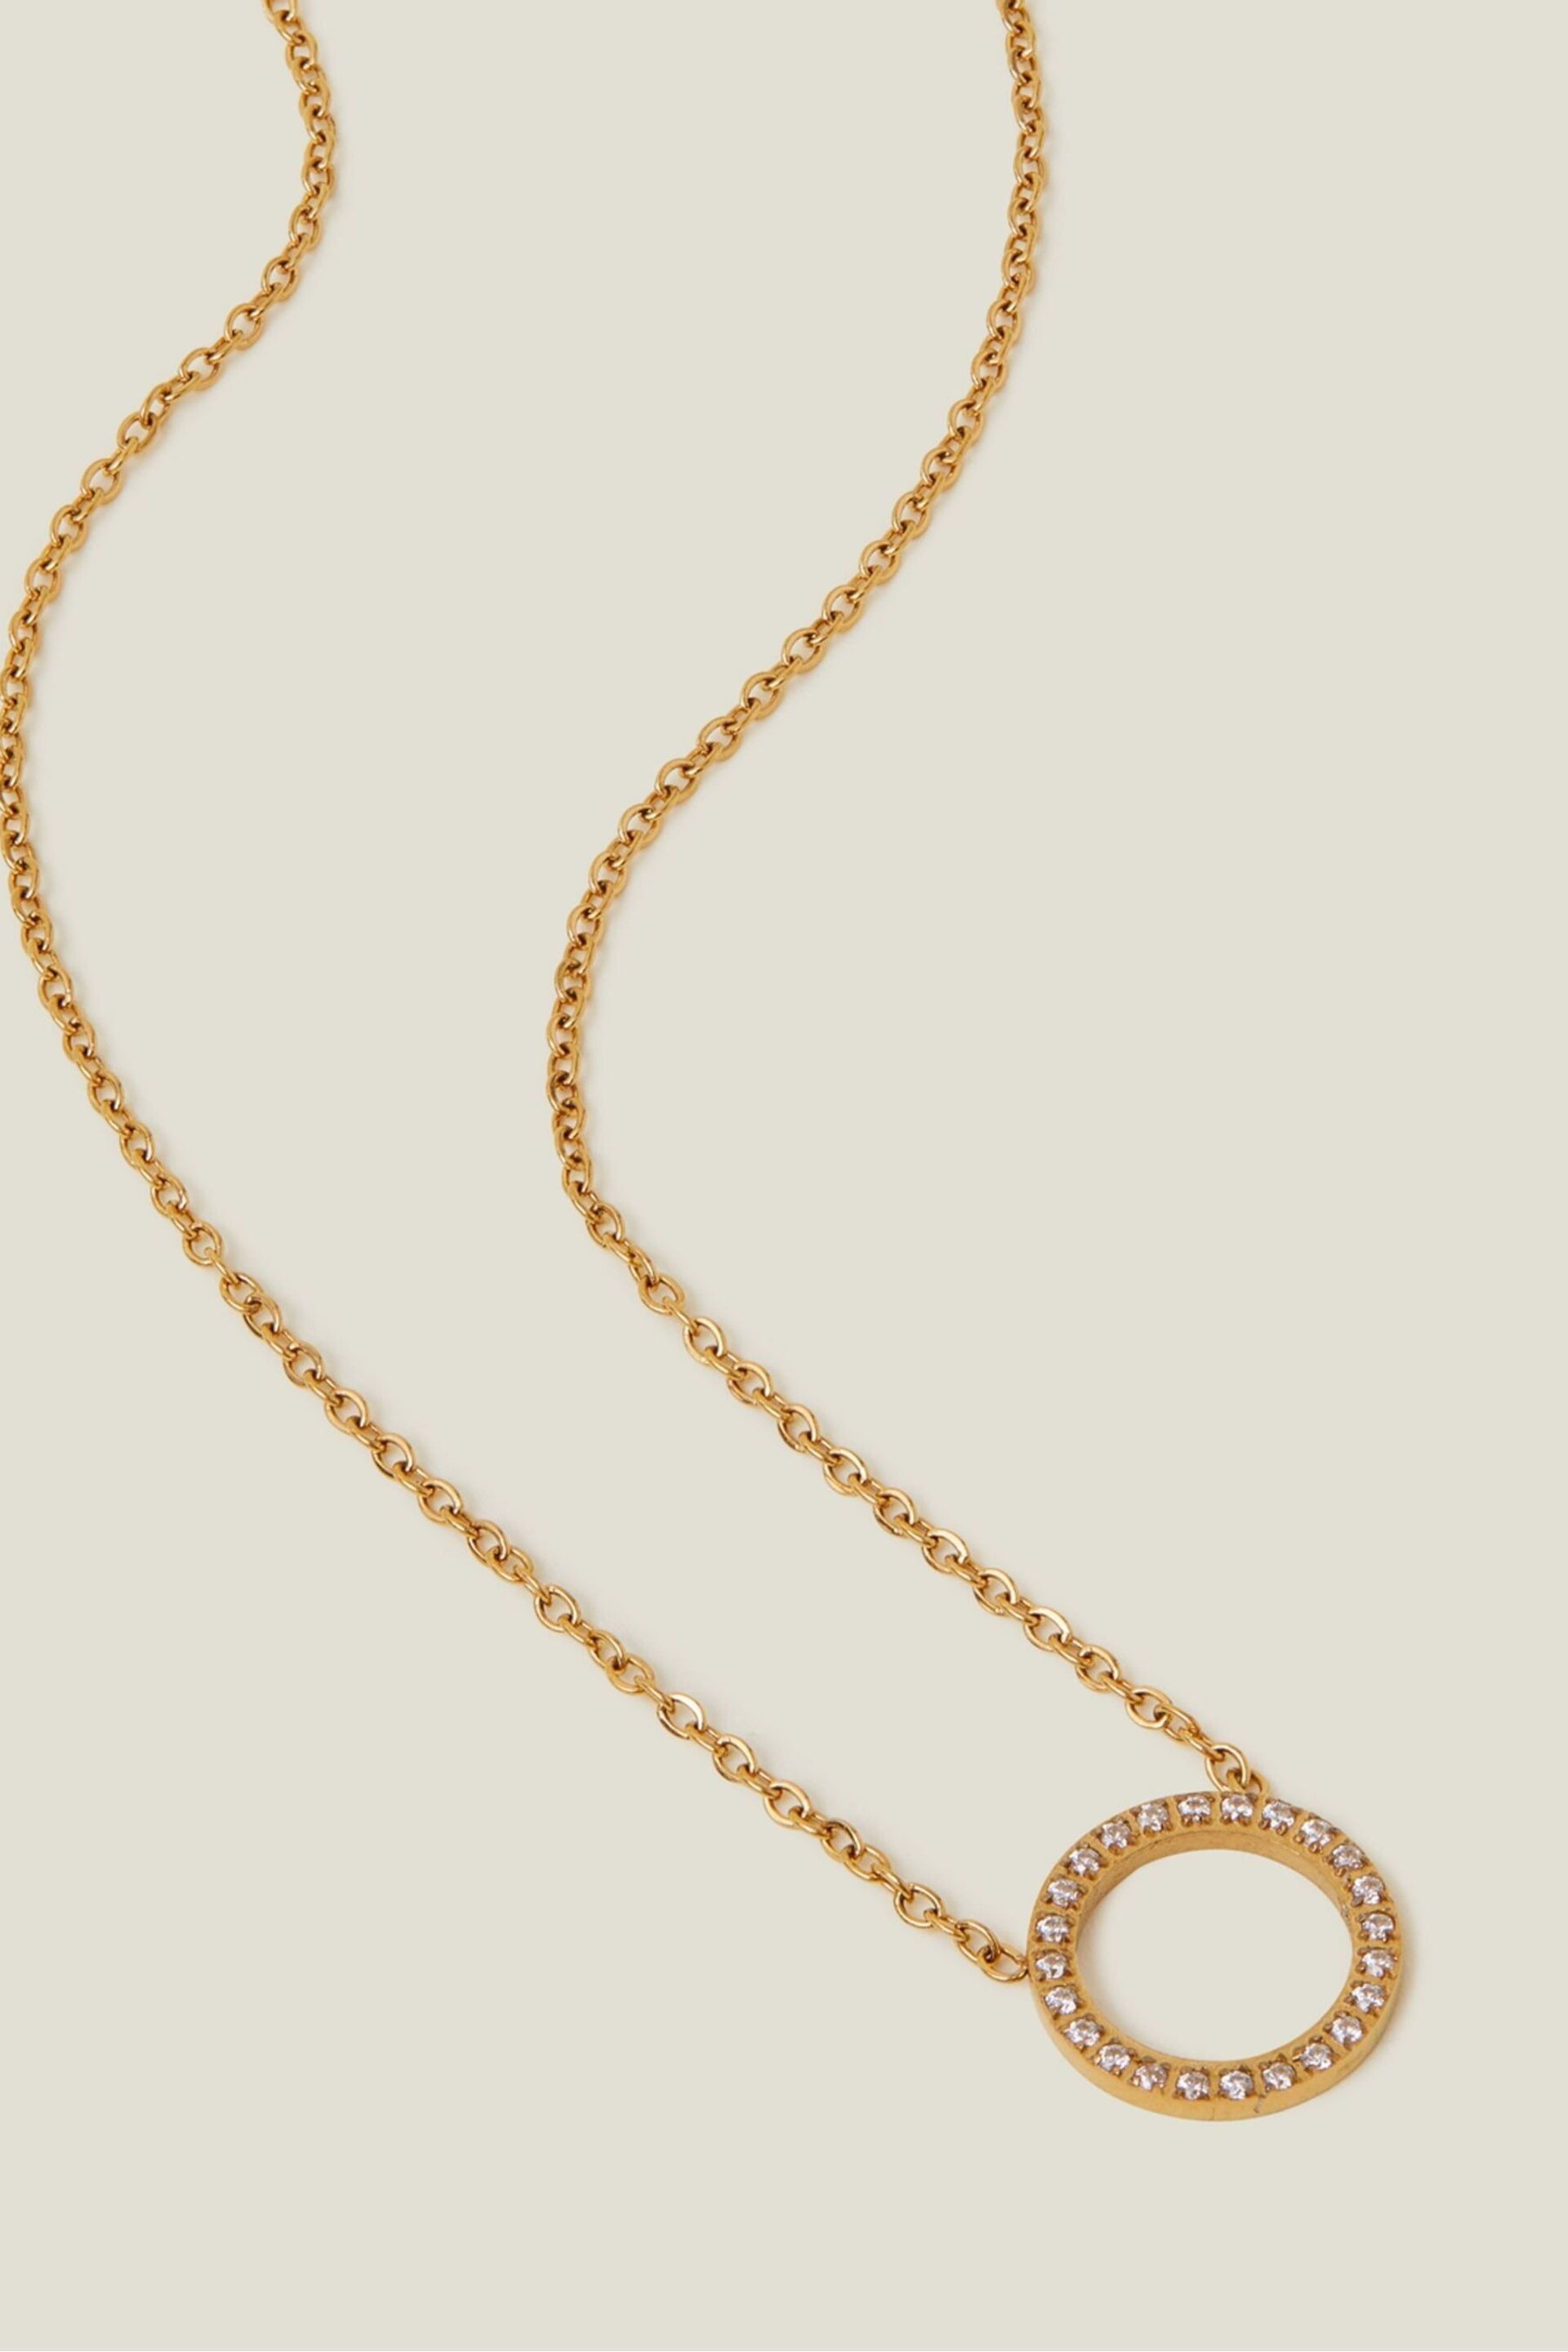 Accessorize Gold Tone Stainless Steel Circle Pendant Necklace - Image 2 of 3